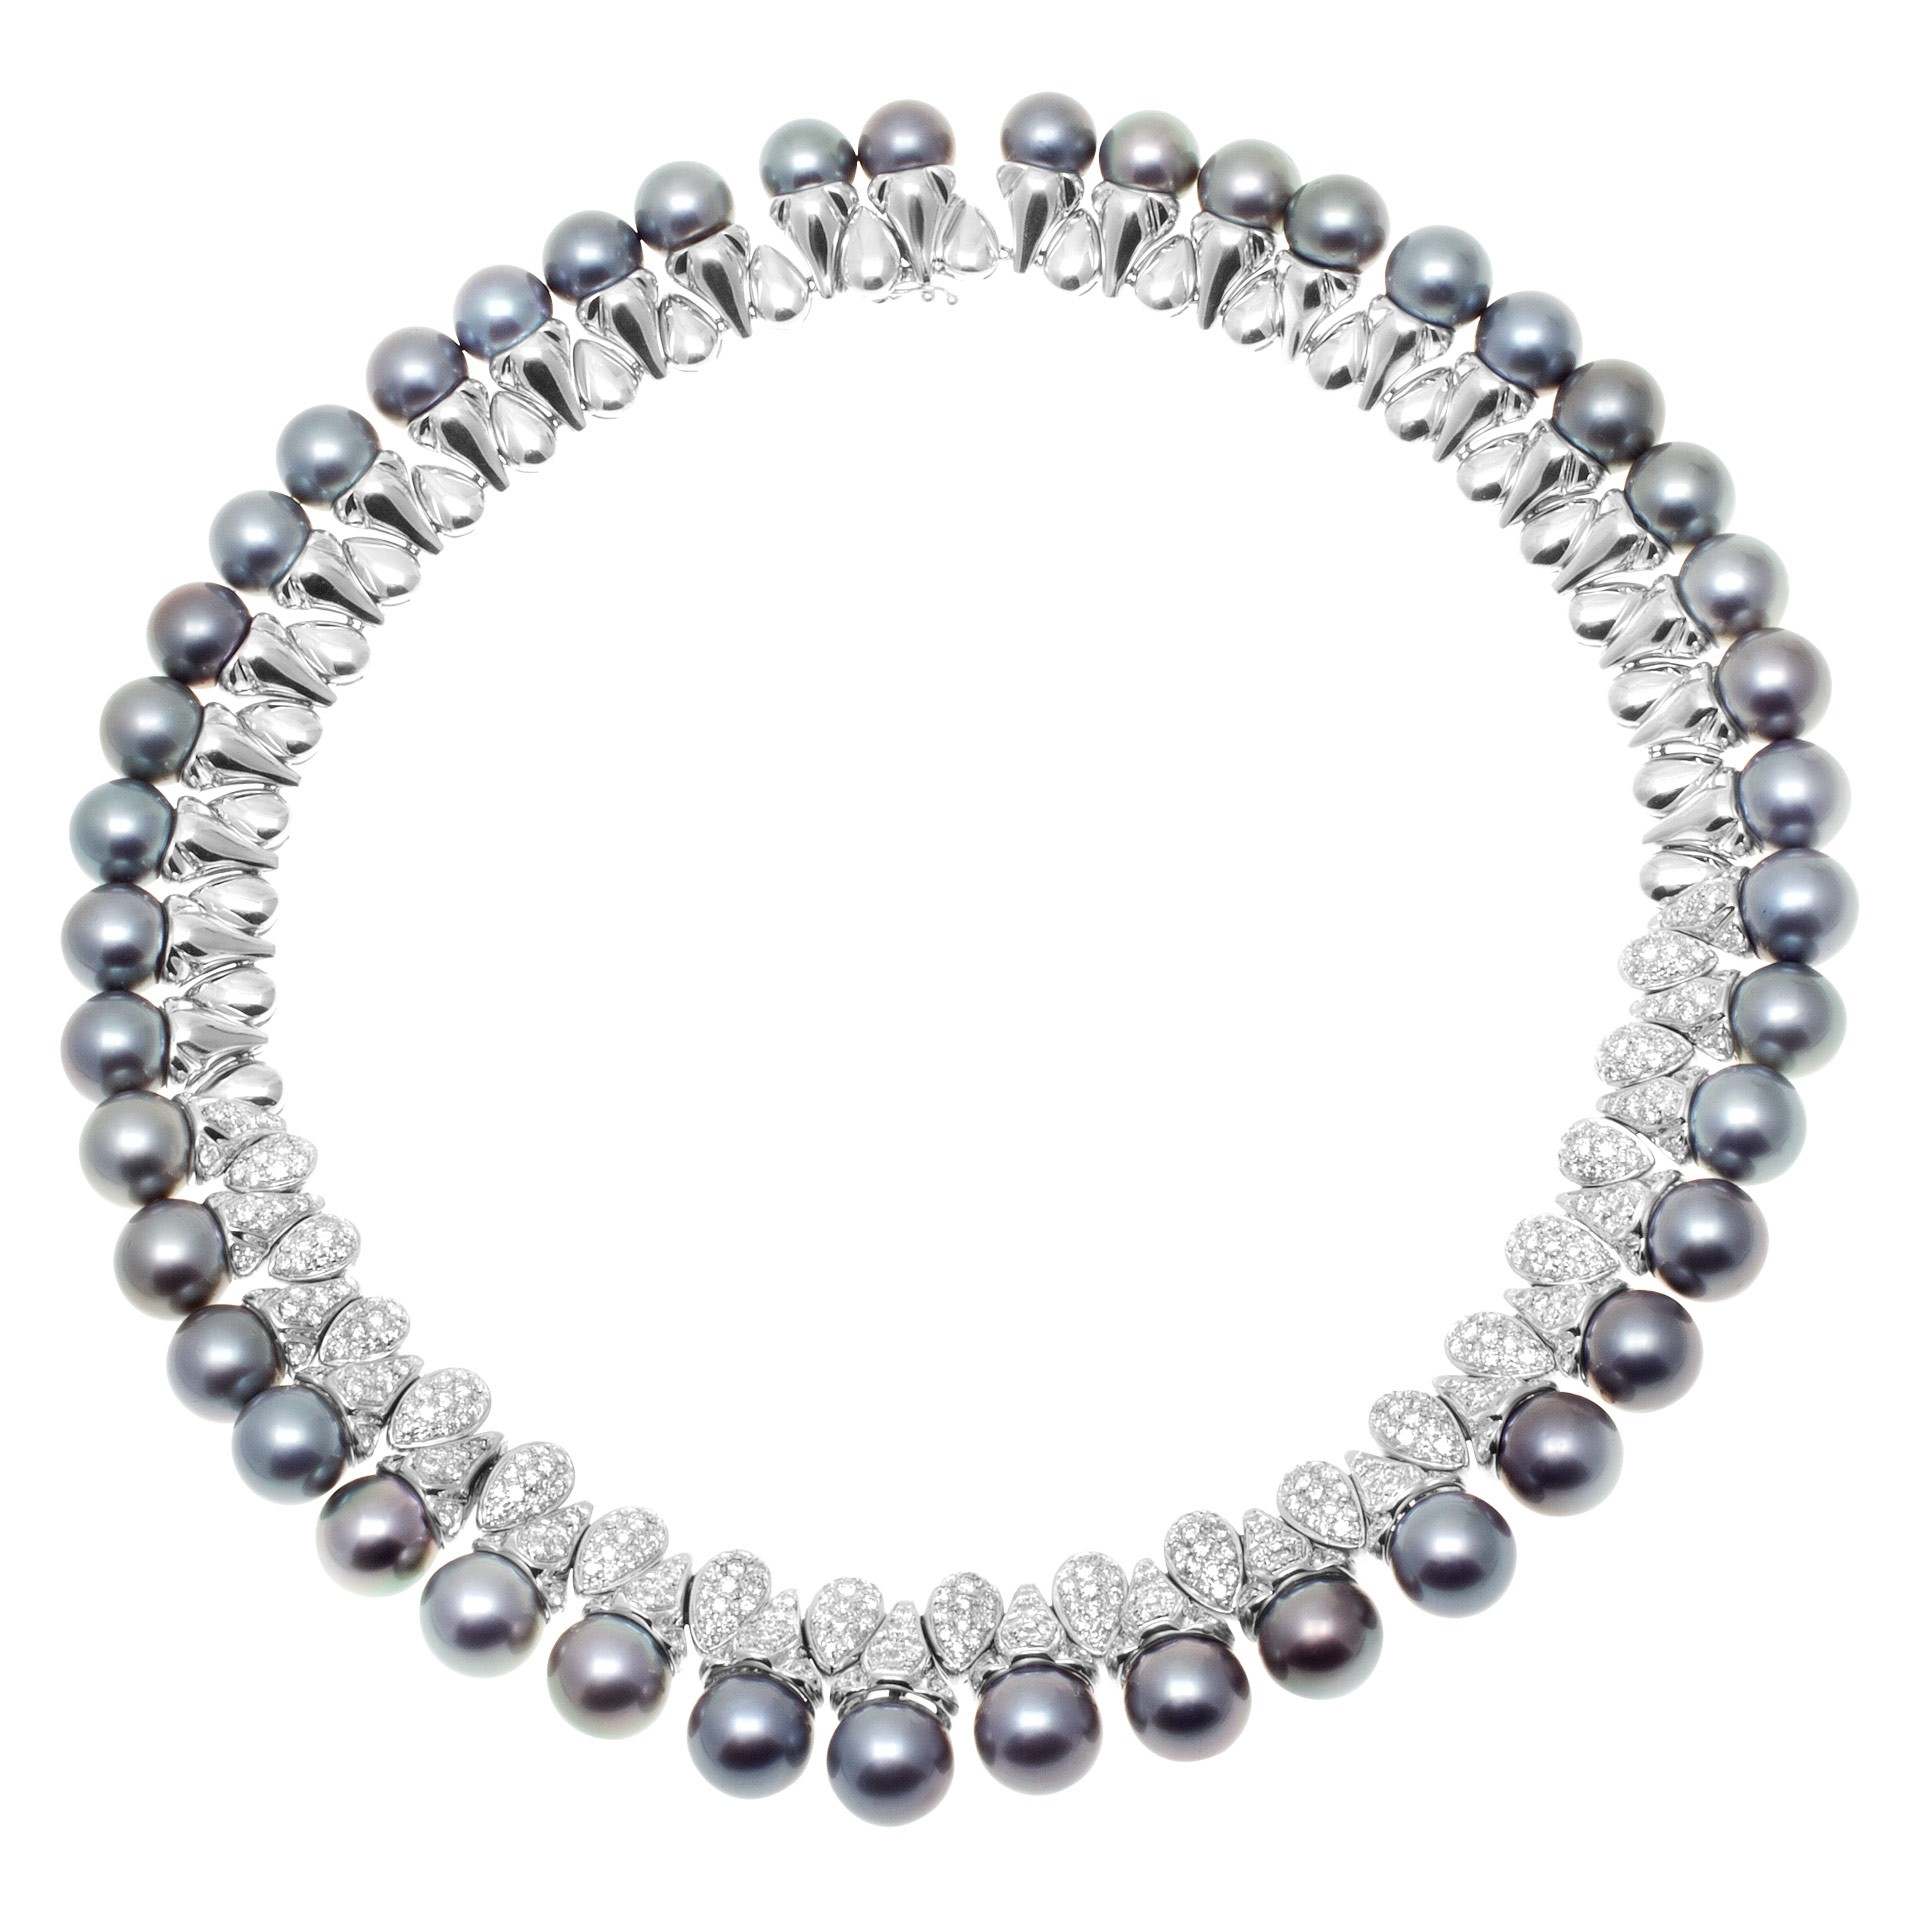 Diamond and Pearl Jewelry: Black pearl and diamond necklace